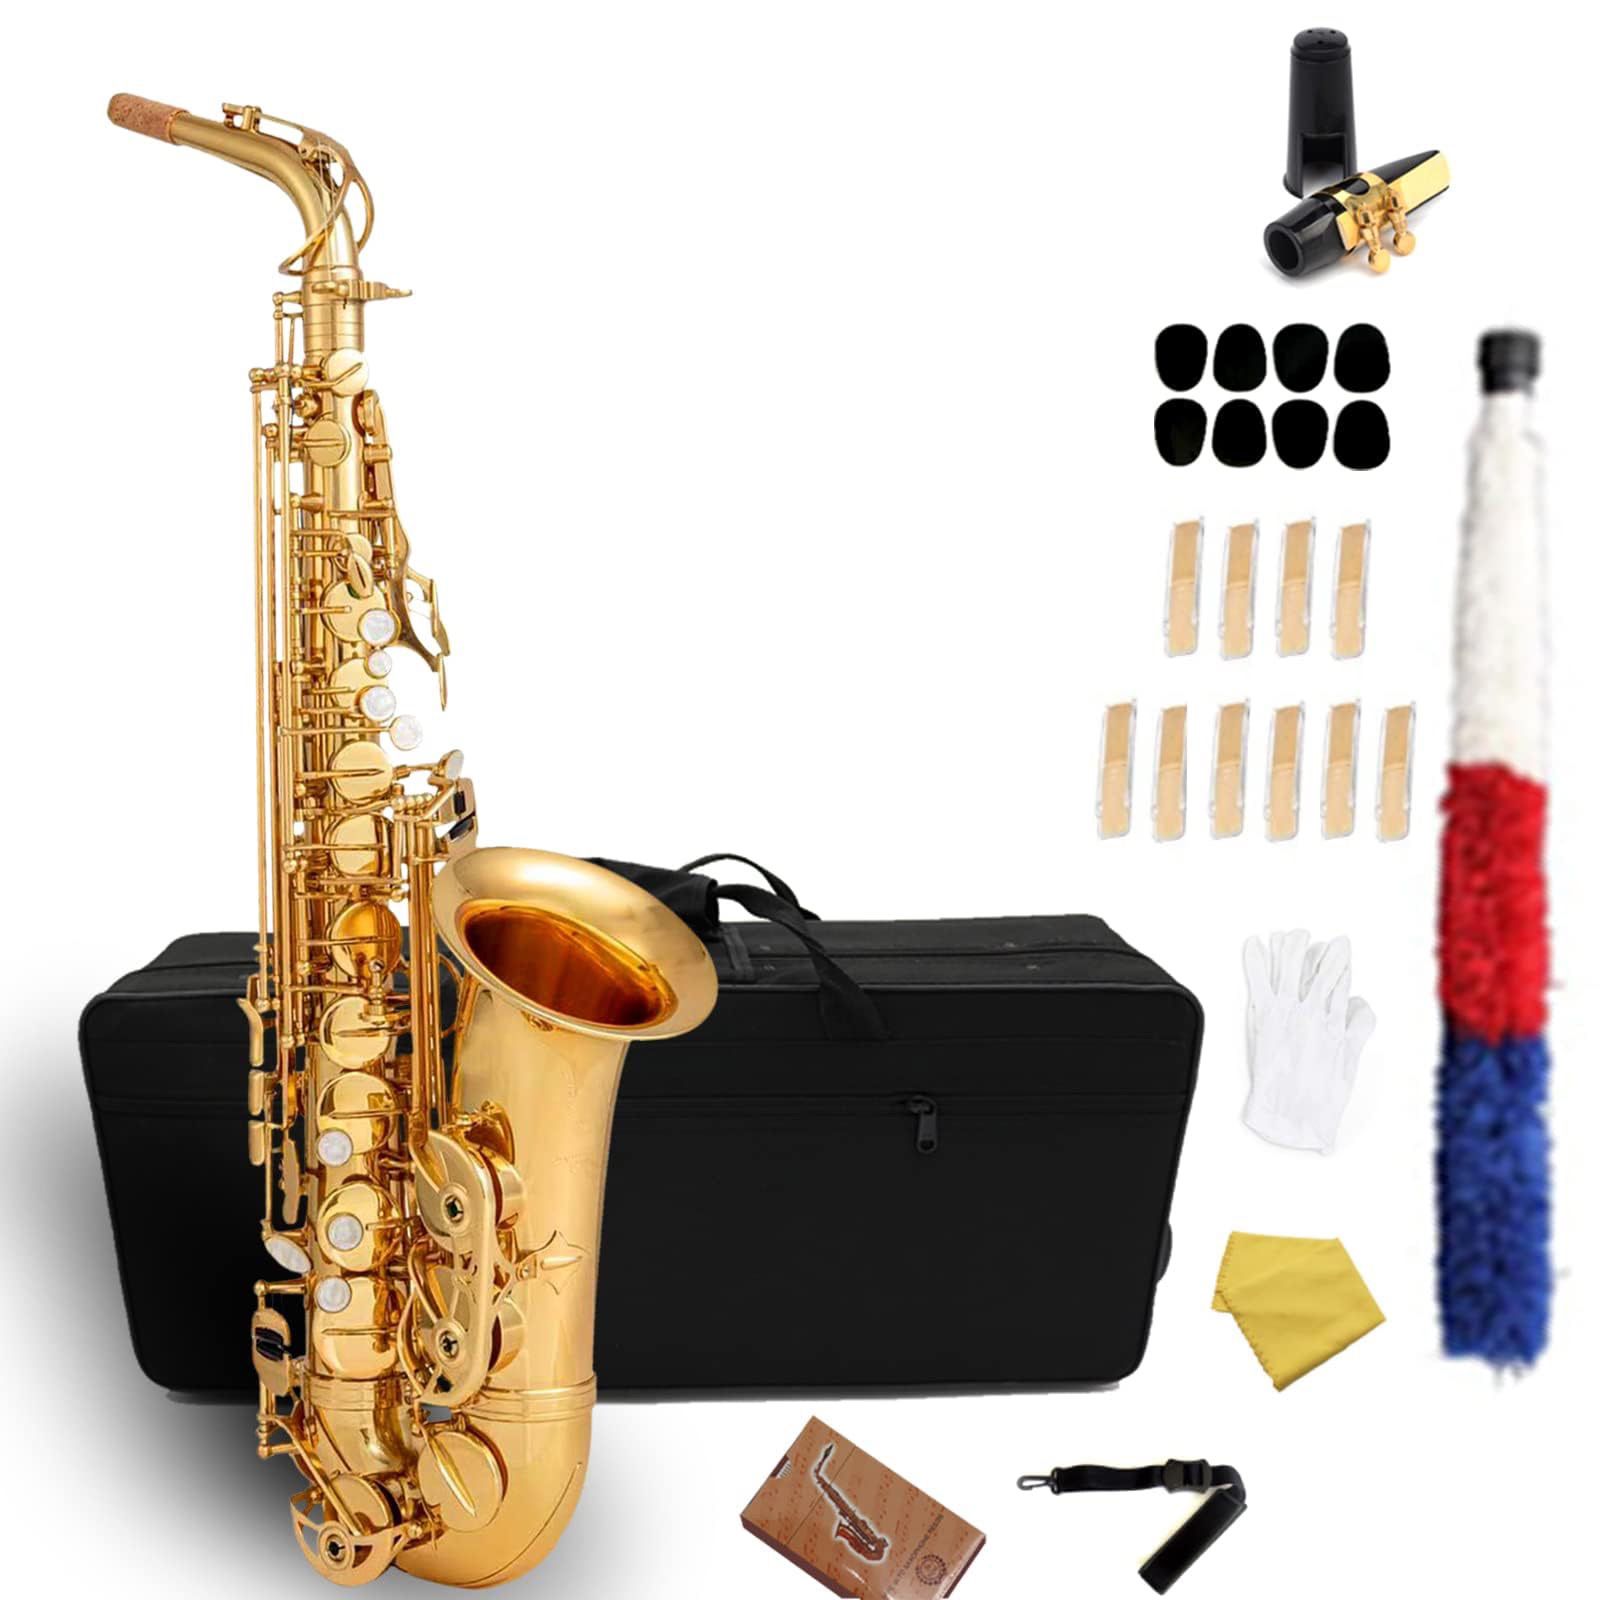 Alto Saxophone for Beginners and Students. Suitable for professional Clarinet and Oboe instrument player of Tenor, Soprano, Baritone.